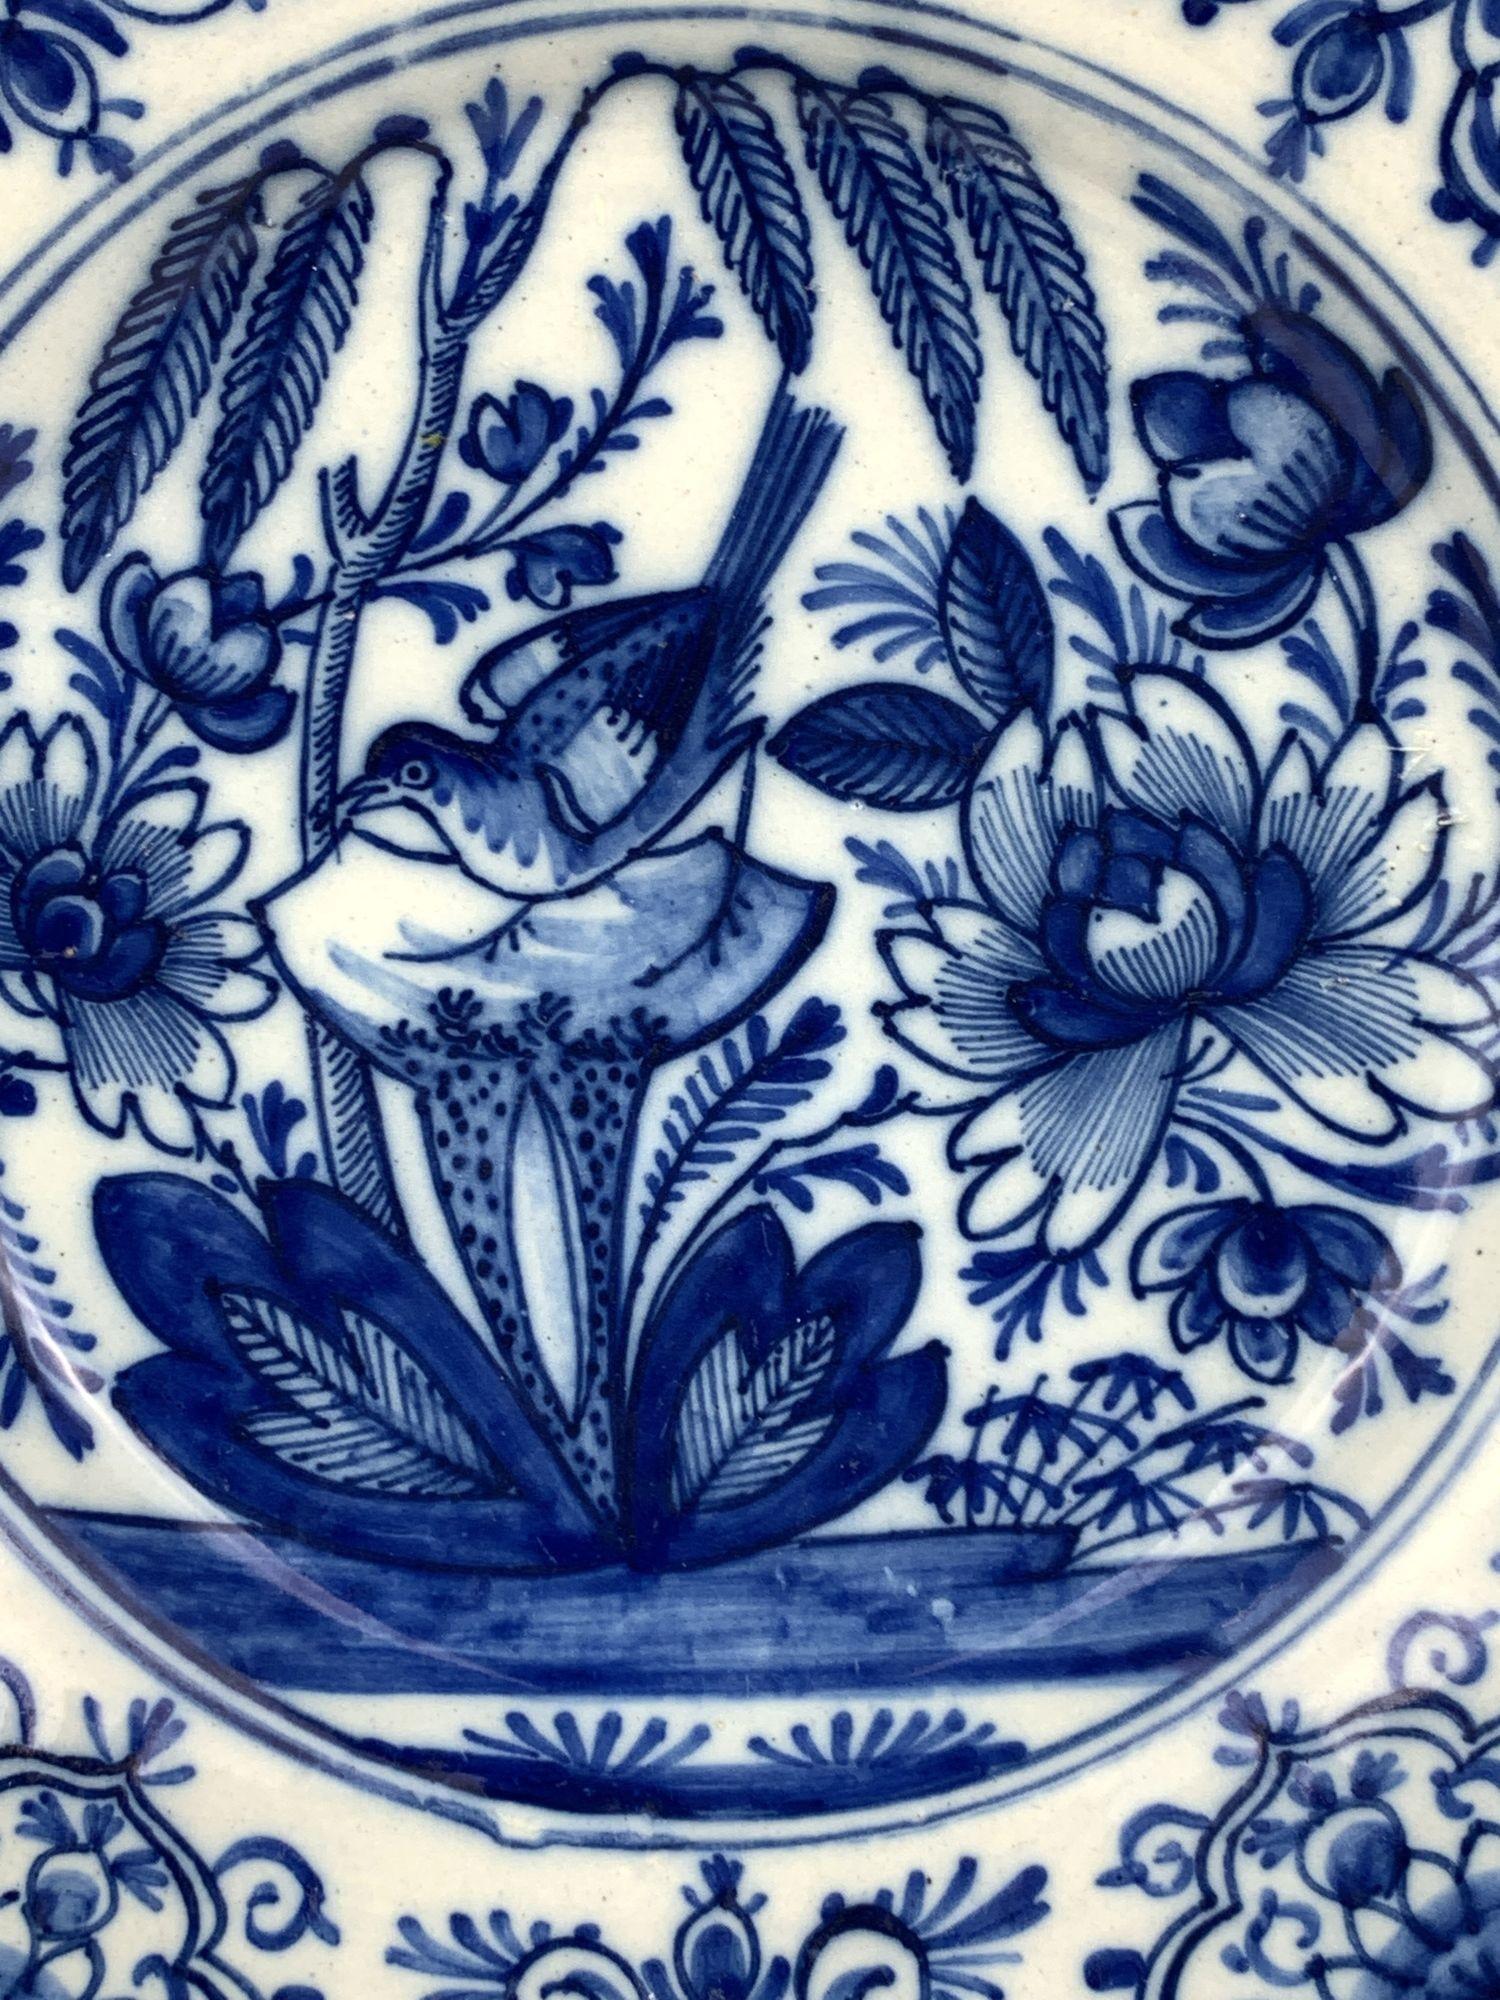 This Delft dish is hand-painted in fabulous, intense cobalt blue. 
The center shows a lovely garden with a songbird among blooming flowers and a willow tree with its branches draped over the garden.
The border of the dish is filled with floral